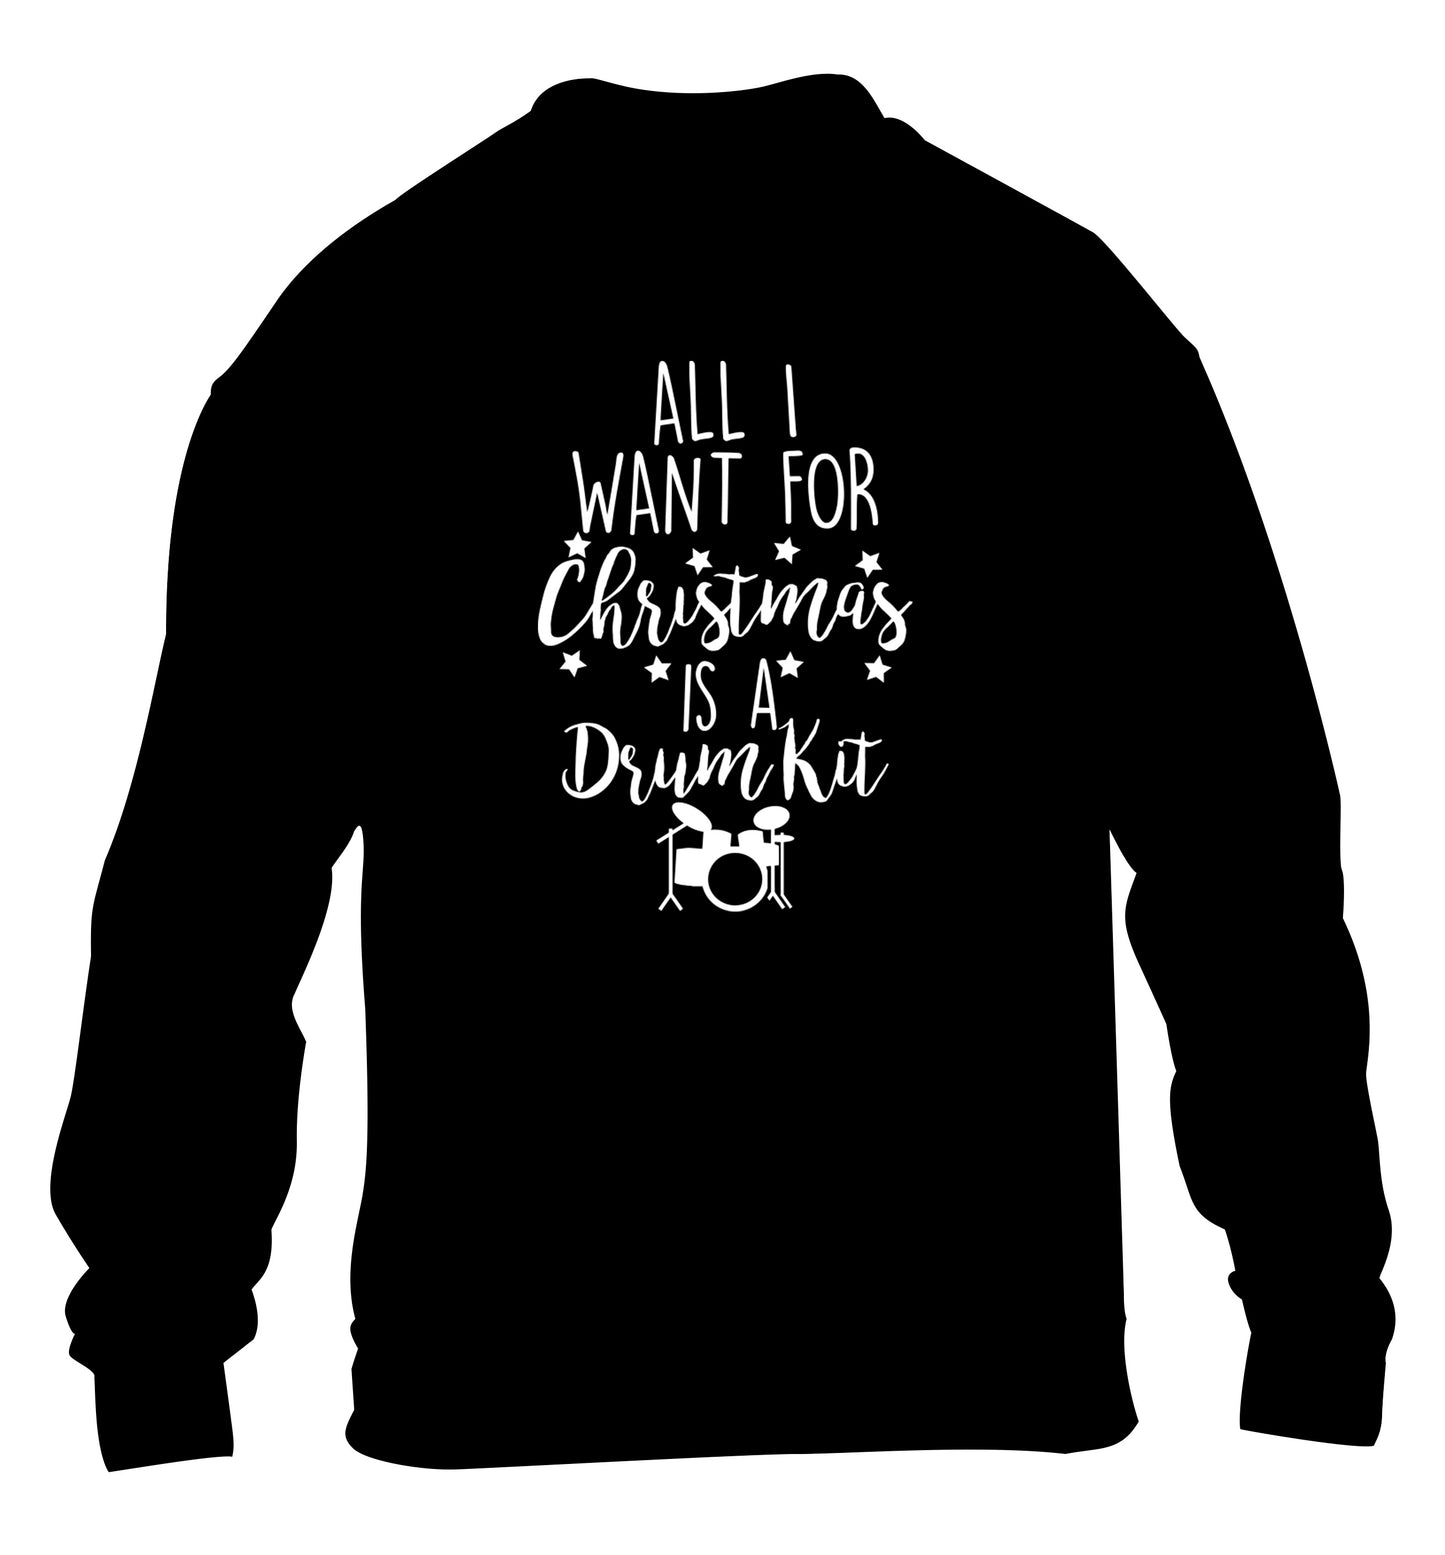 All I want for Christmas is a drum kit! children's black sweater 12-14 Years